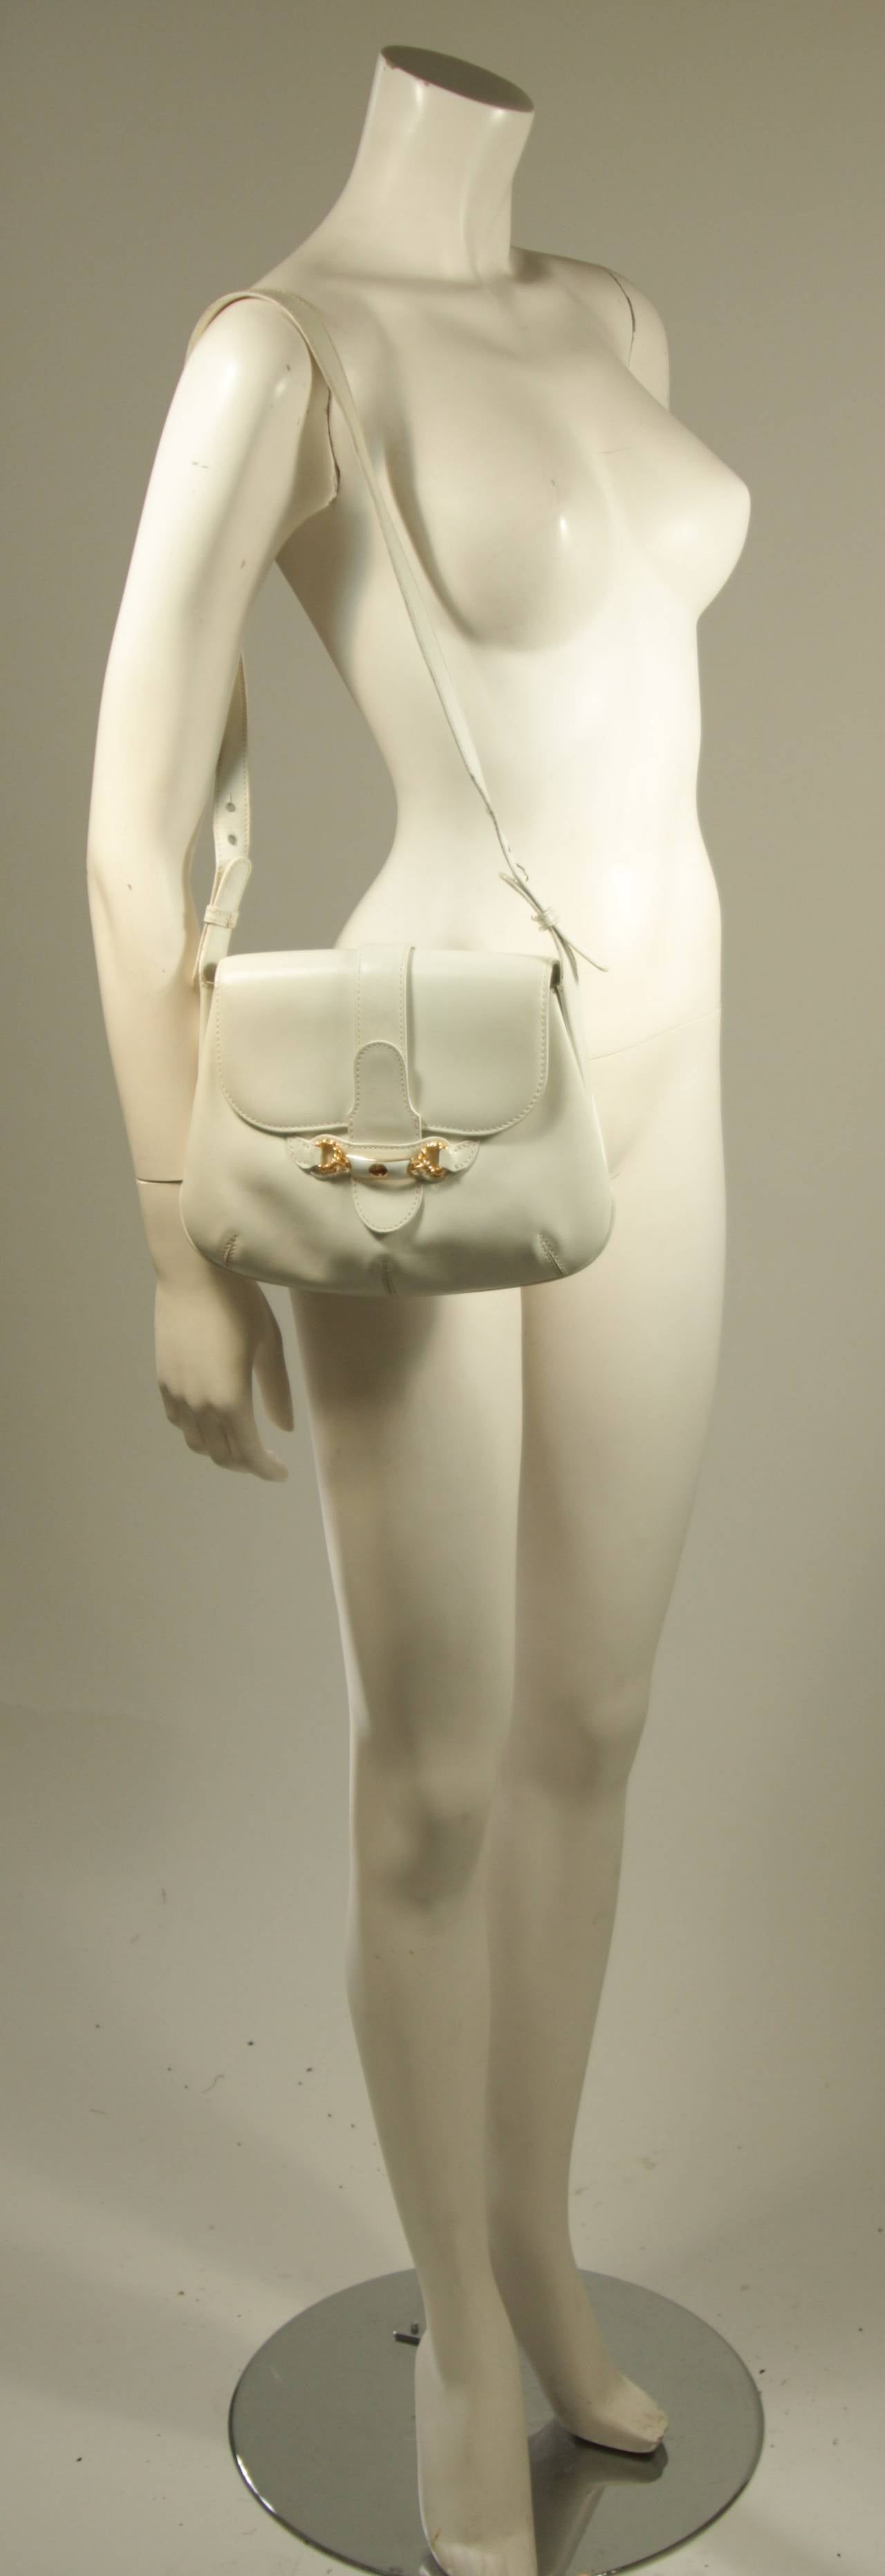 This Gucci purse is available for viewing at our Beverly Hills Boutique. The purse is composed of a white leather (the bag shows slight signs of wear and marks). The closure features the classic Gucci horse bit design. There are two interior